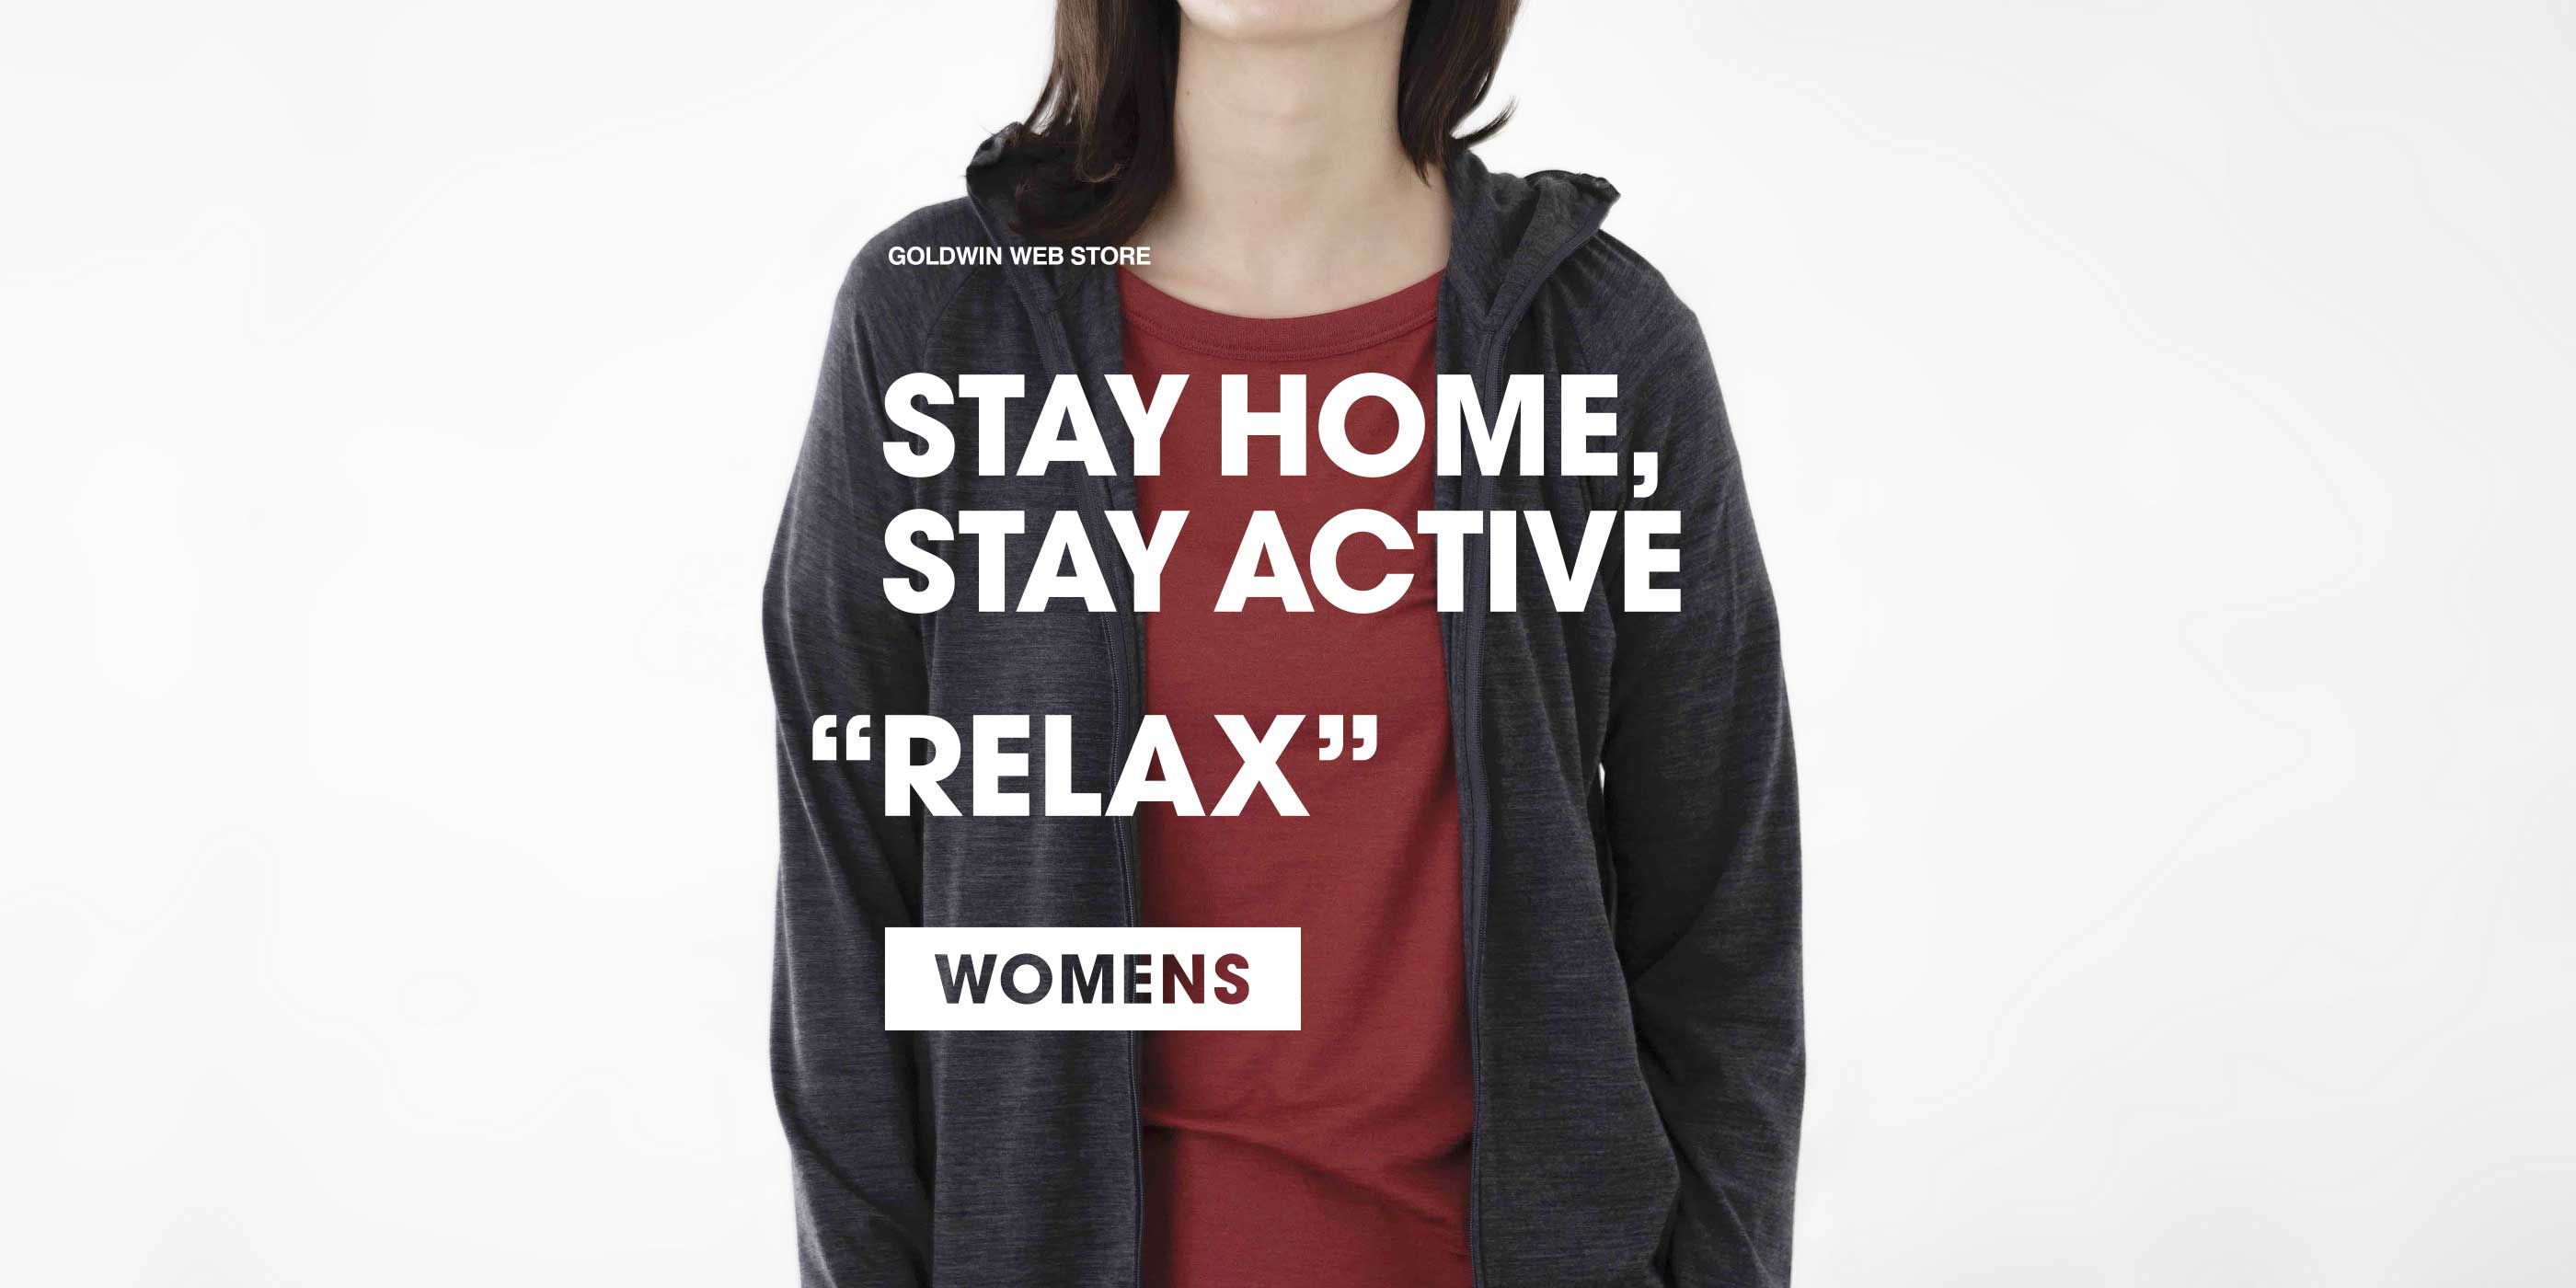 STAY HOME, STAY ACTIVE "RELAX" WOMENS